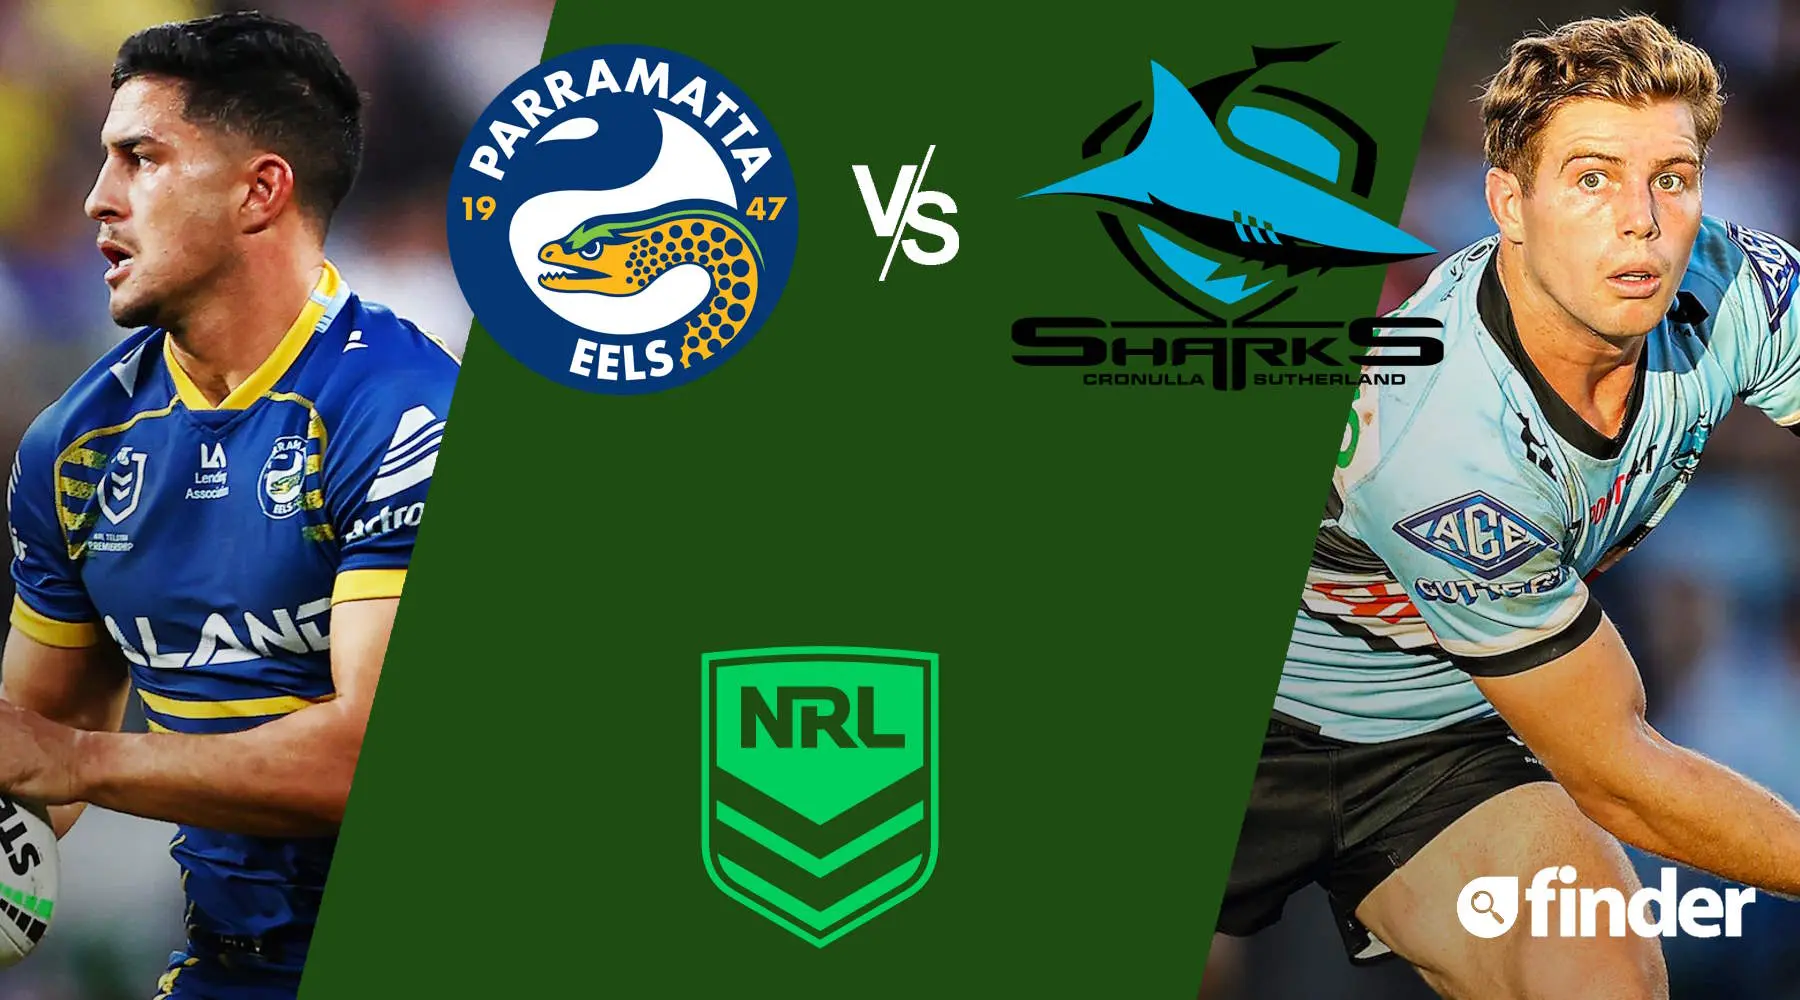 How to watch Eels vs Sharks NRL live and match preview